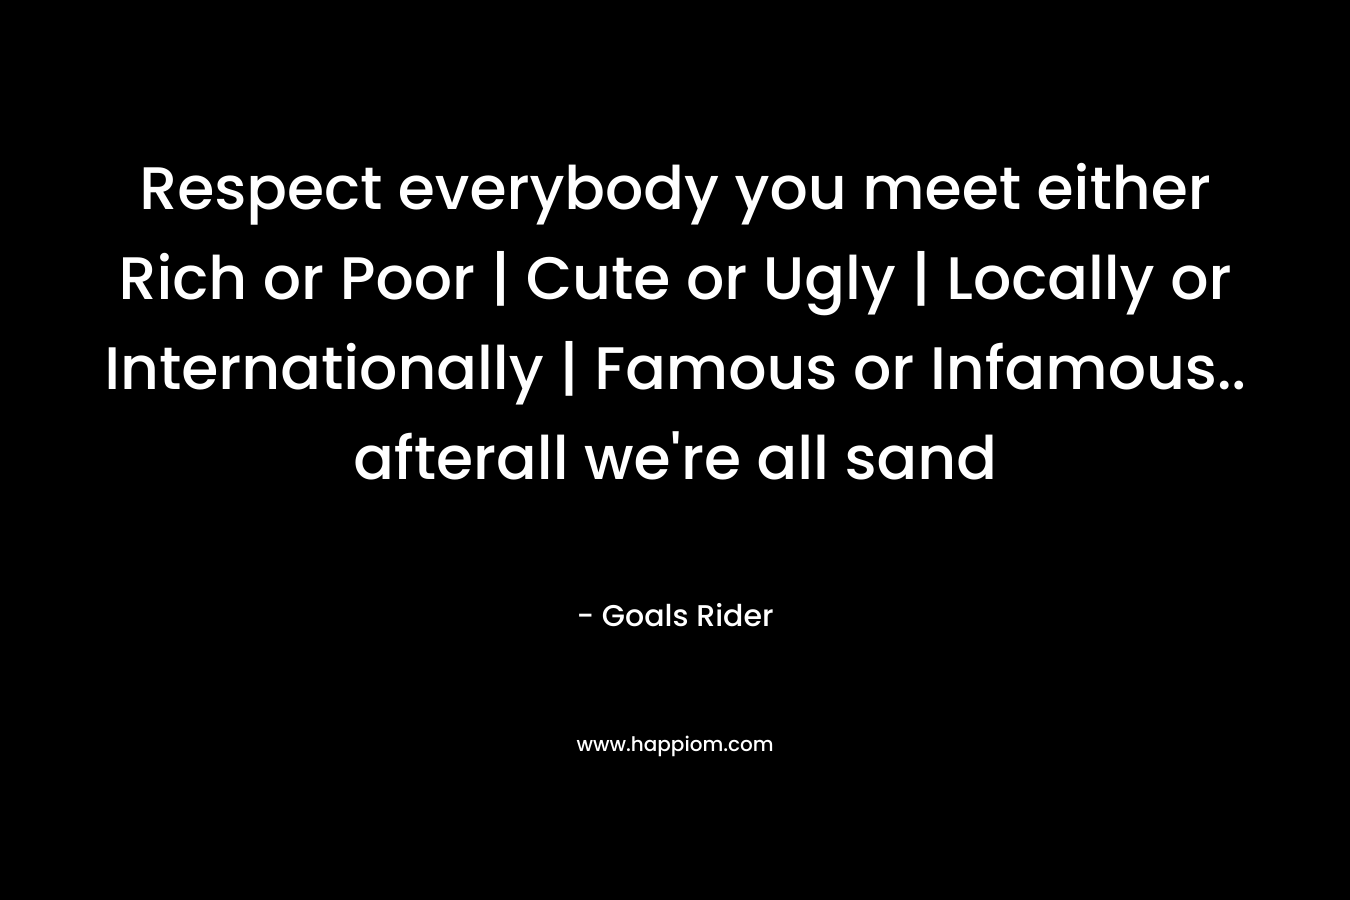 Respect everybody you meet either Rich or Poor | Cute or Ugly | Locally or Internationally | Famous or Infamous.. afterall we’re all sand – Goals Rider